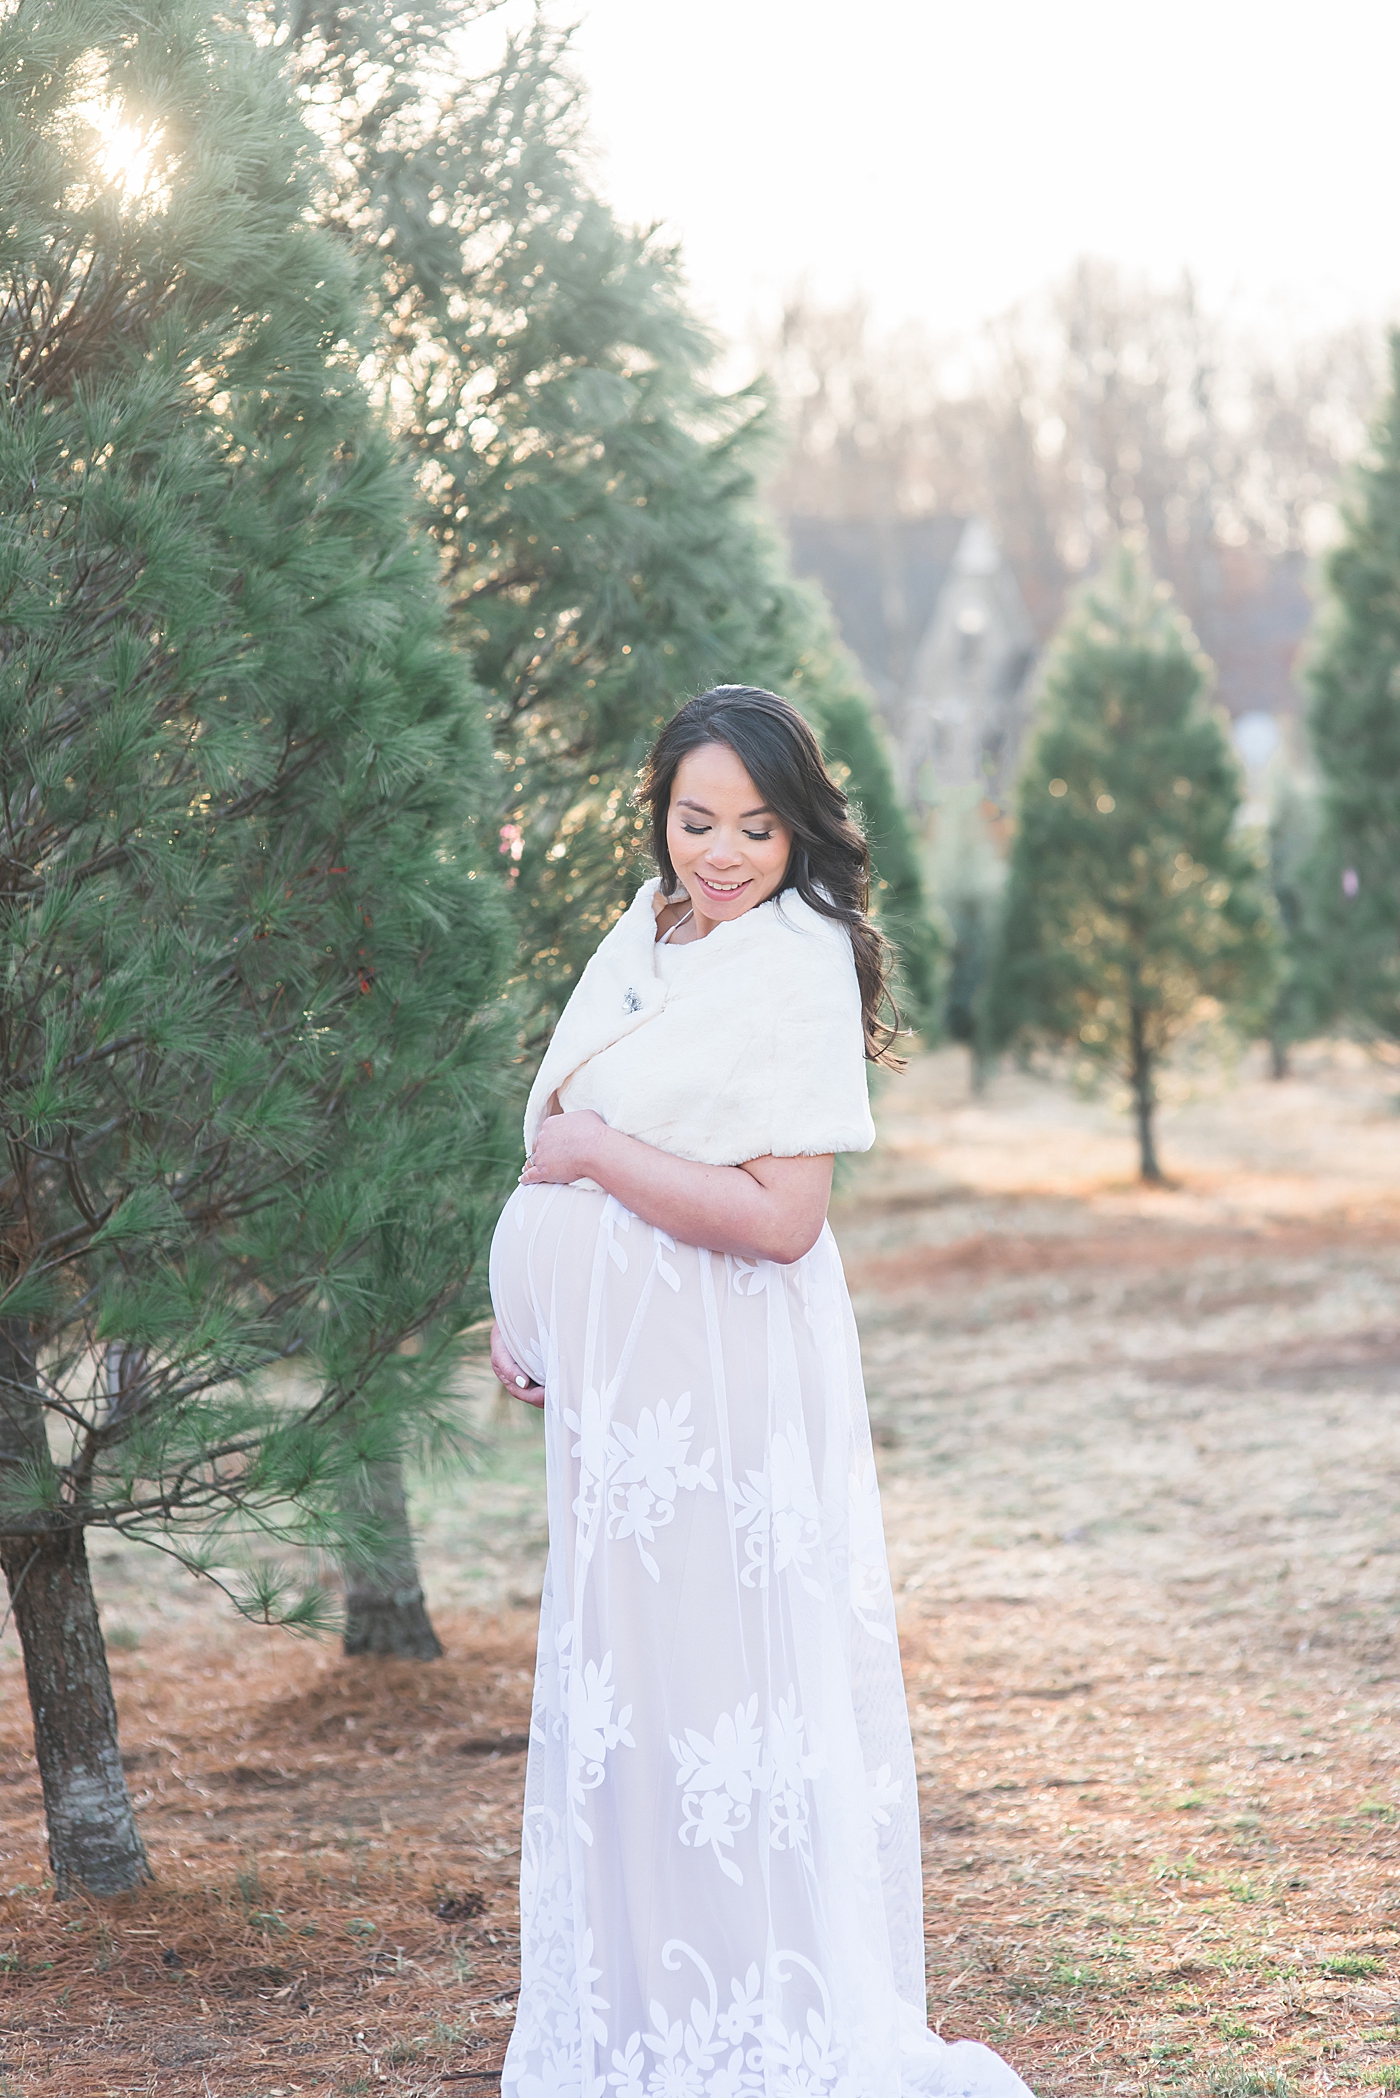 Mom to be in lace dress holding her belly | Photo by Anna Wisjo Photography